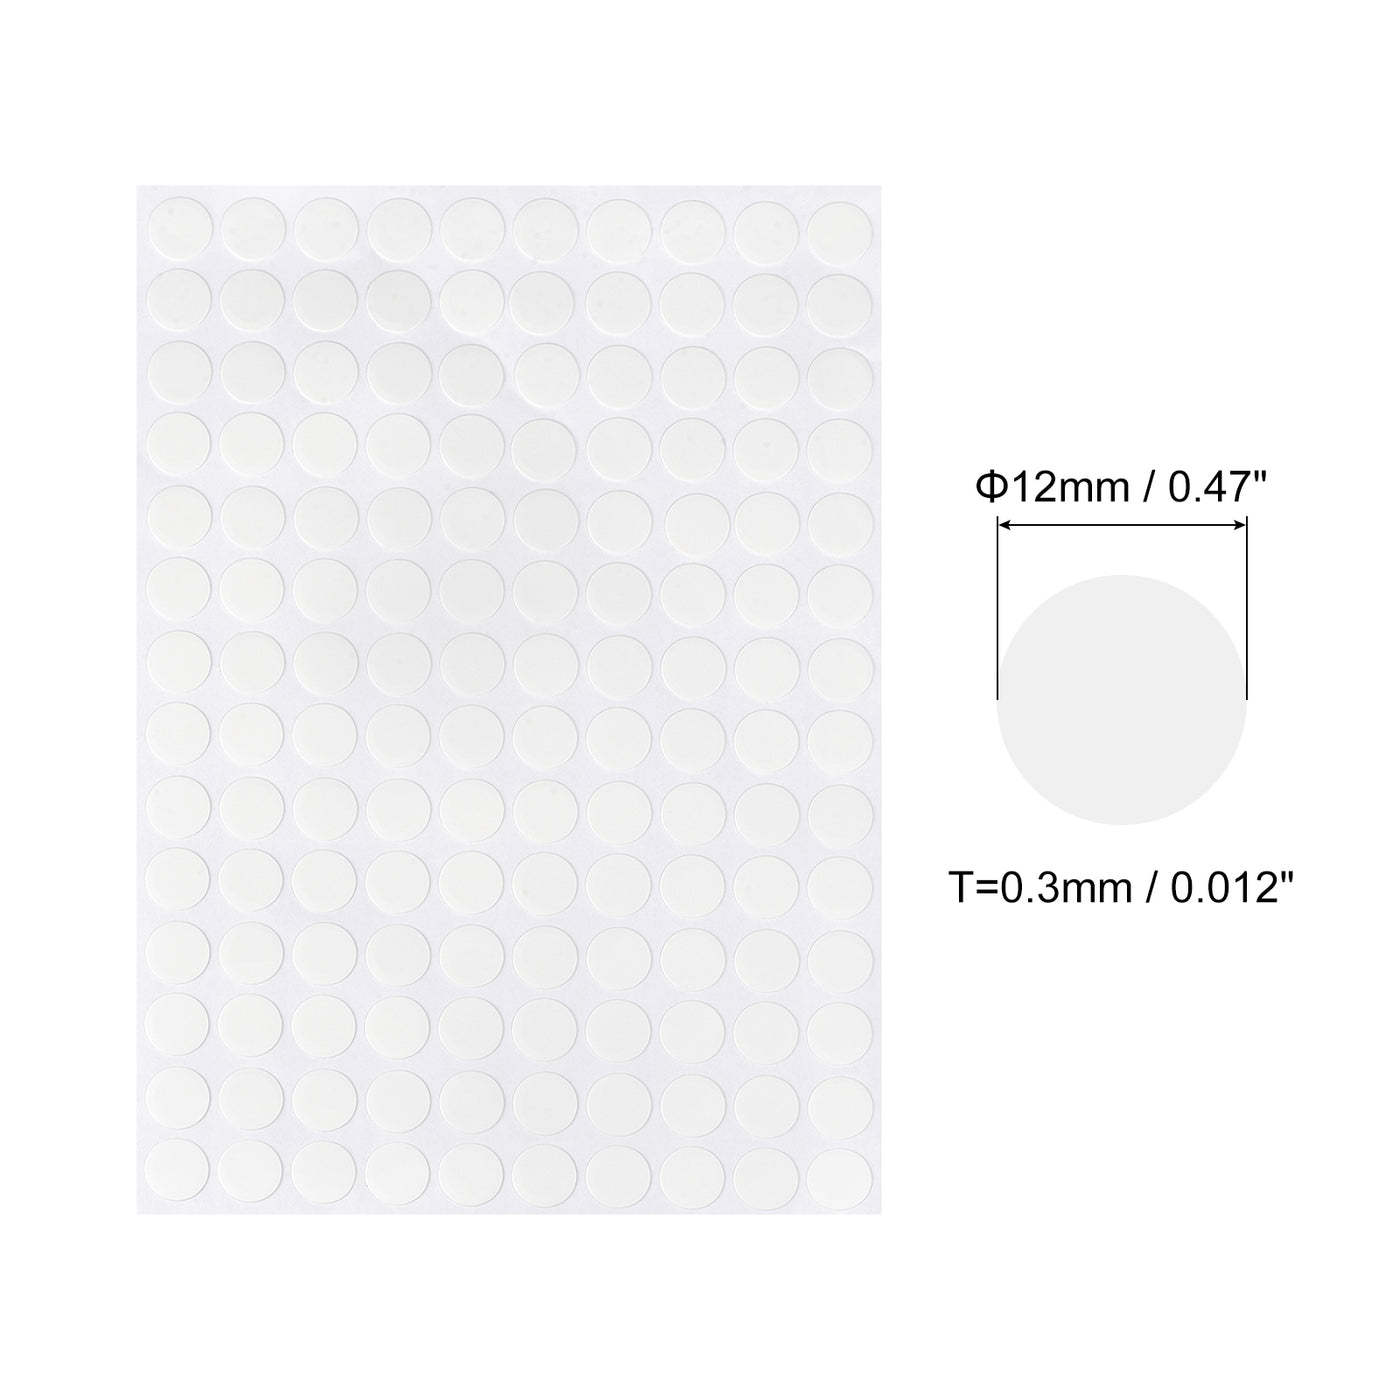 uxcell Uxcell Screw Hole Cover Stickers, 12mm Dia PVC Self Adhesive Covers Caps for Wood Furniture Cabinet Shelf Wardrobe, White 4 Sheet/560pcs